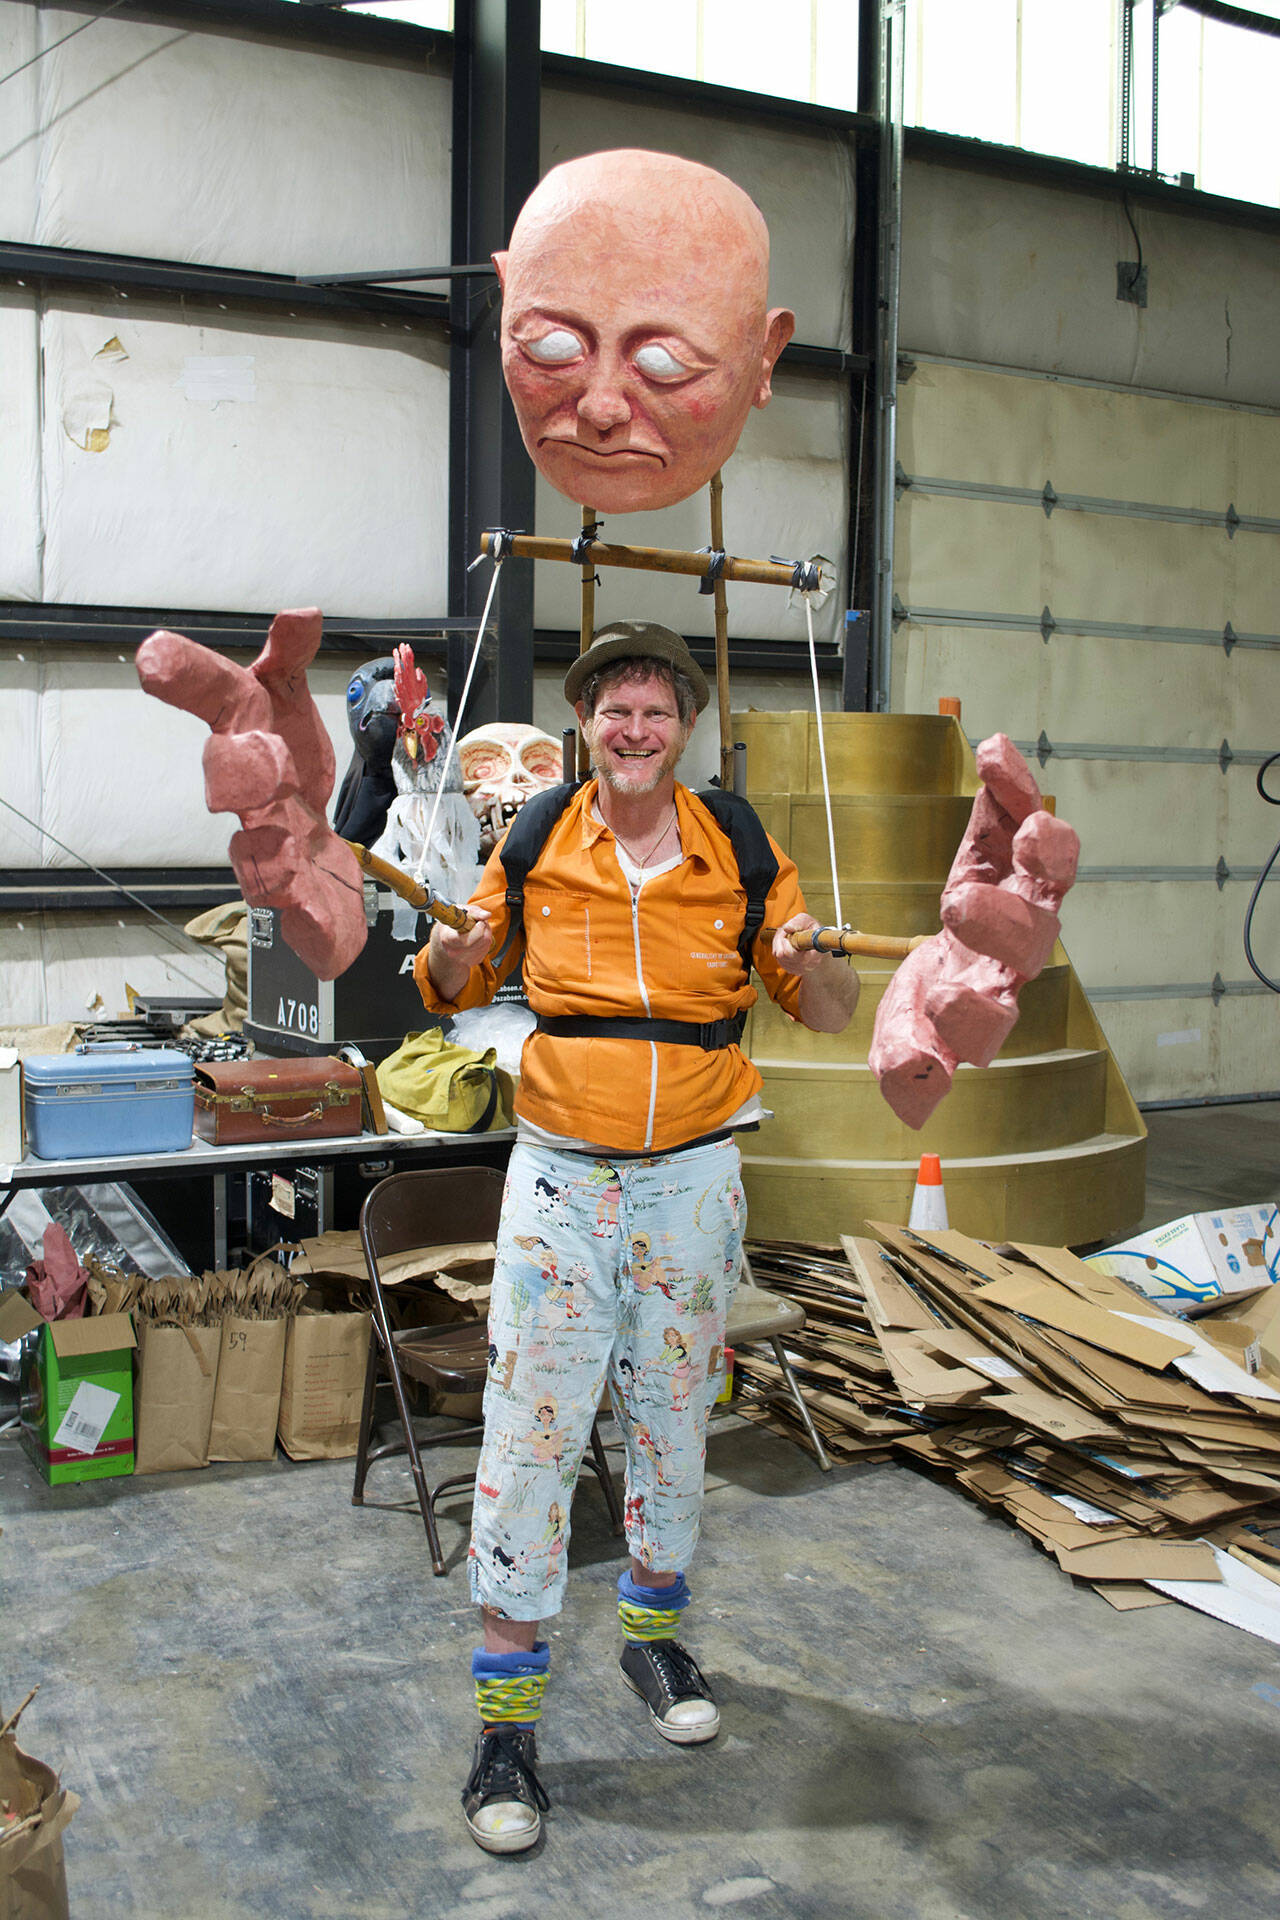 Making weird stuff: Making a giant puppet / costume for a pantomime giant